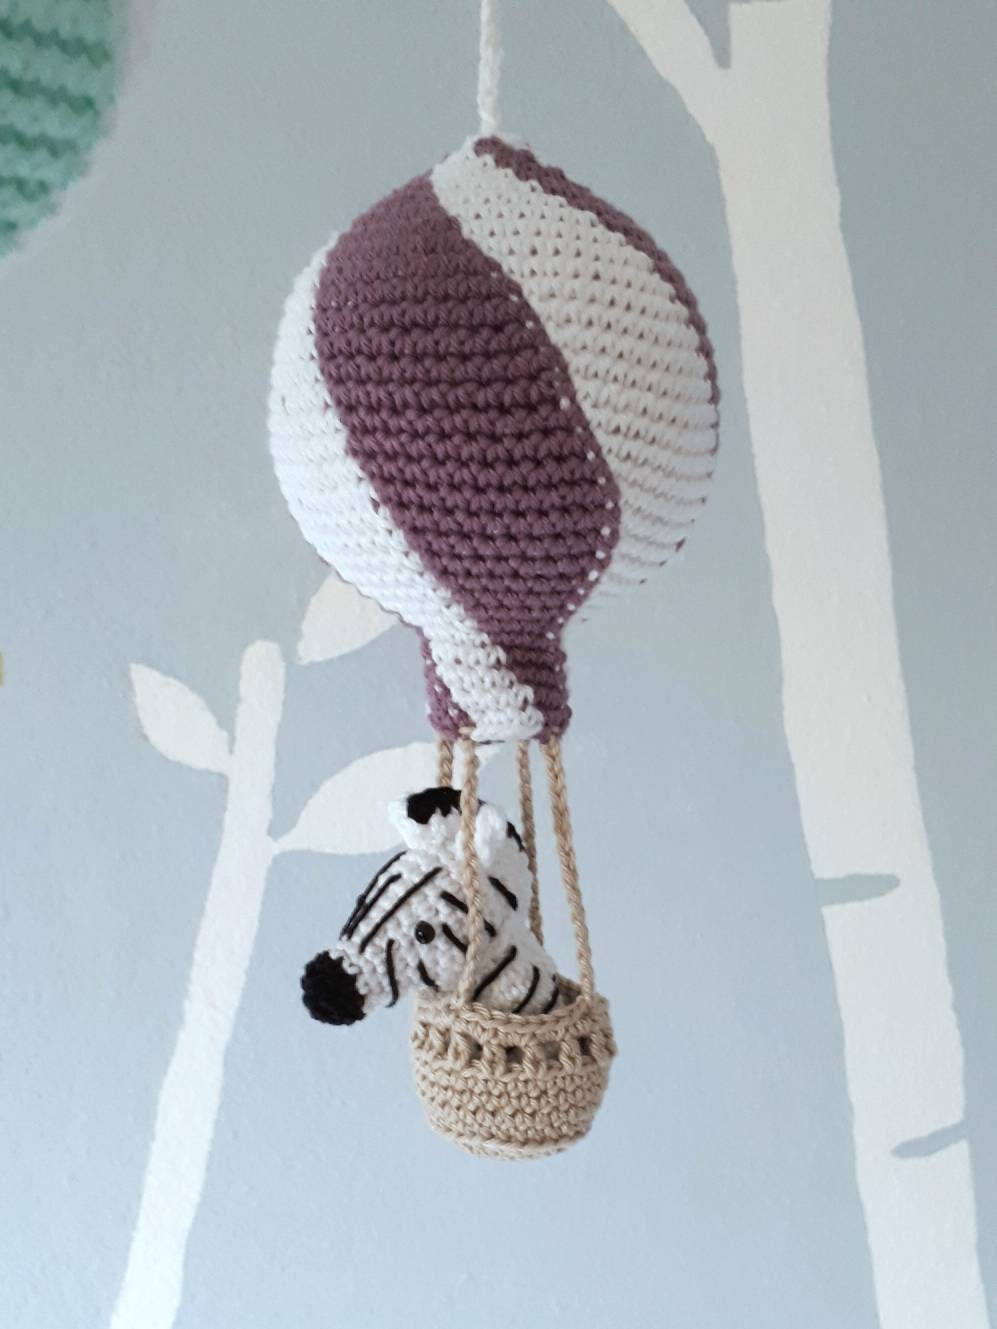 Hot air balloon mobile with crochet animals